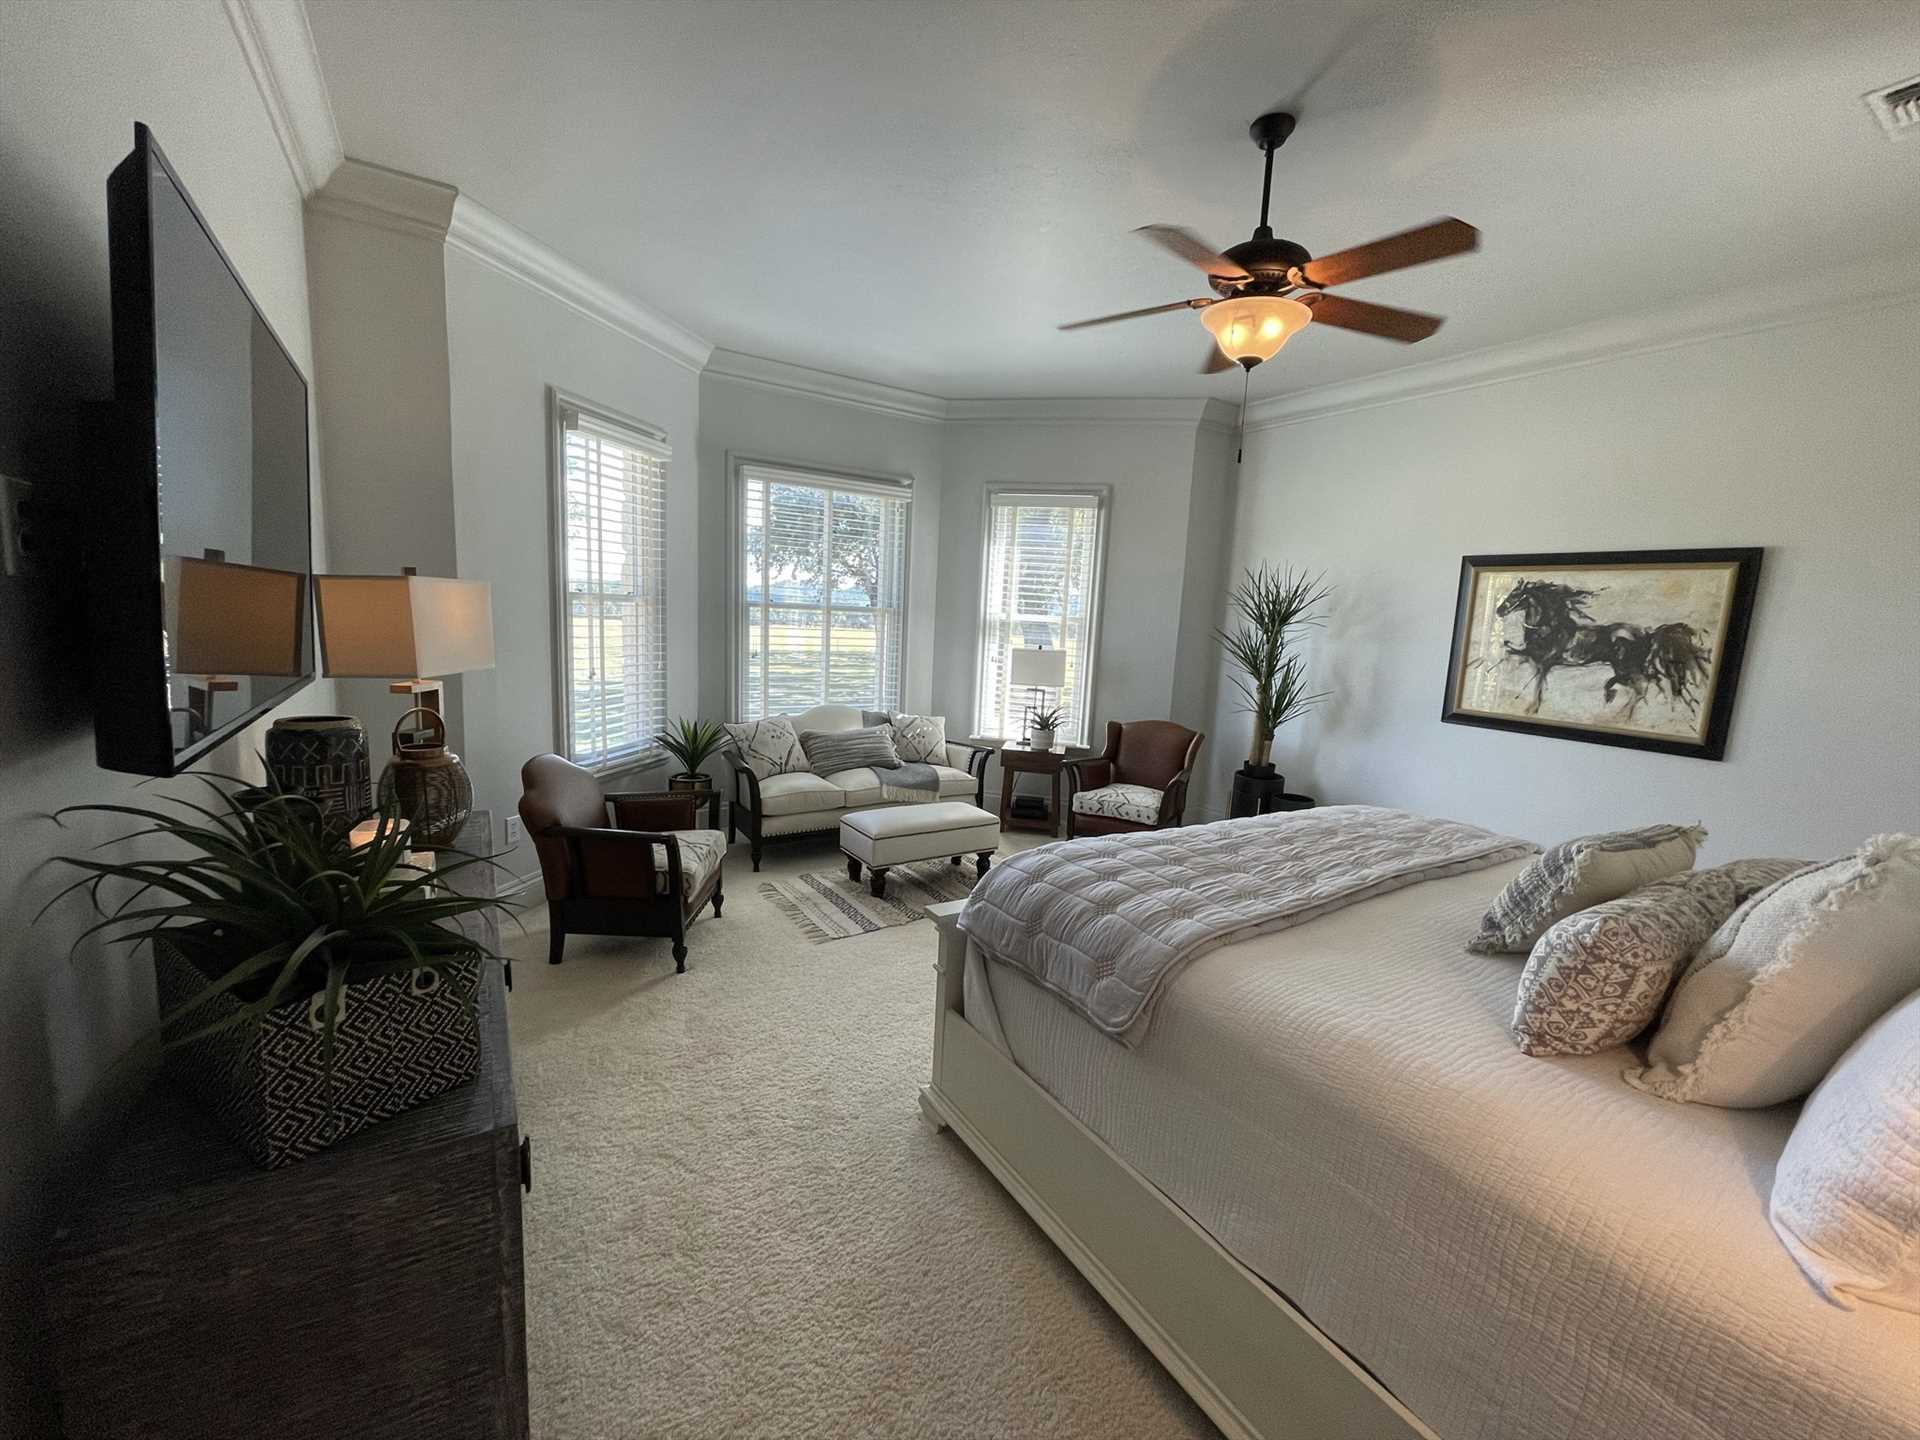                                                 With all the space and extras in the regal master suite, you'll be tempted not to leave!